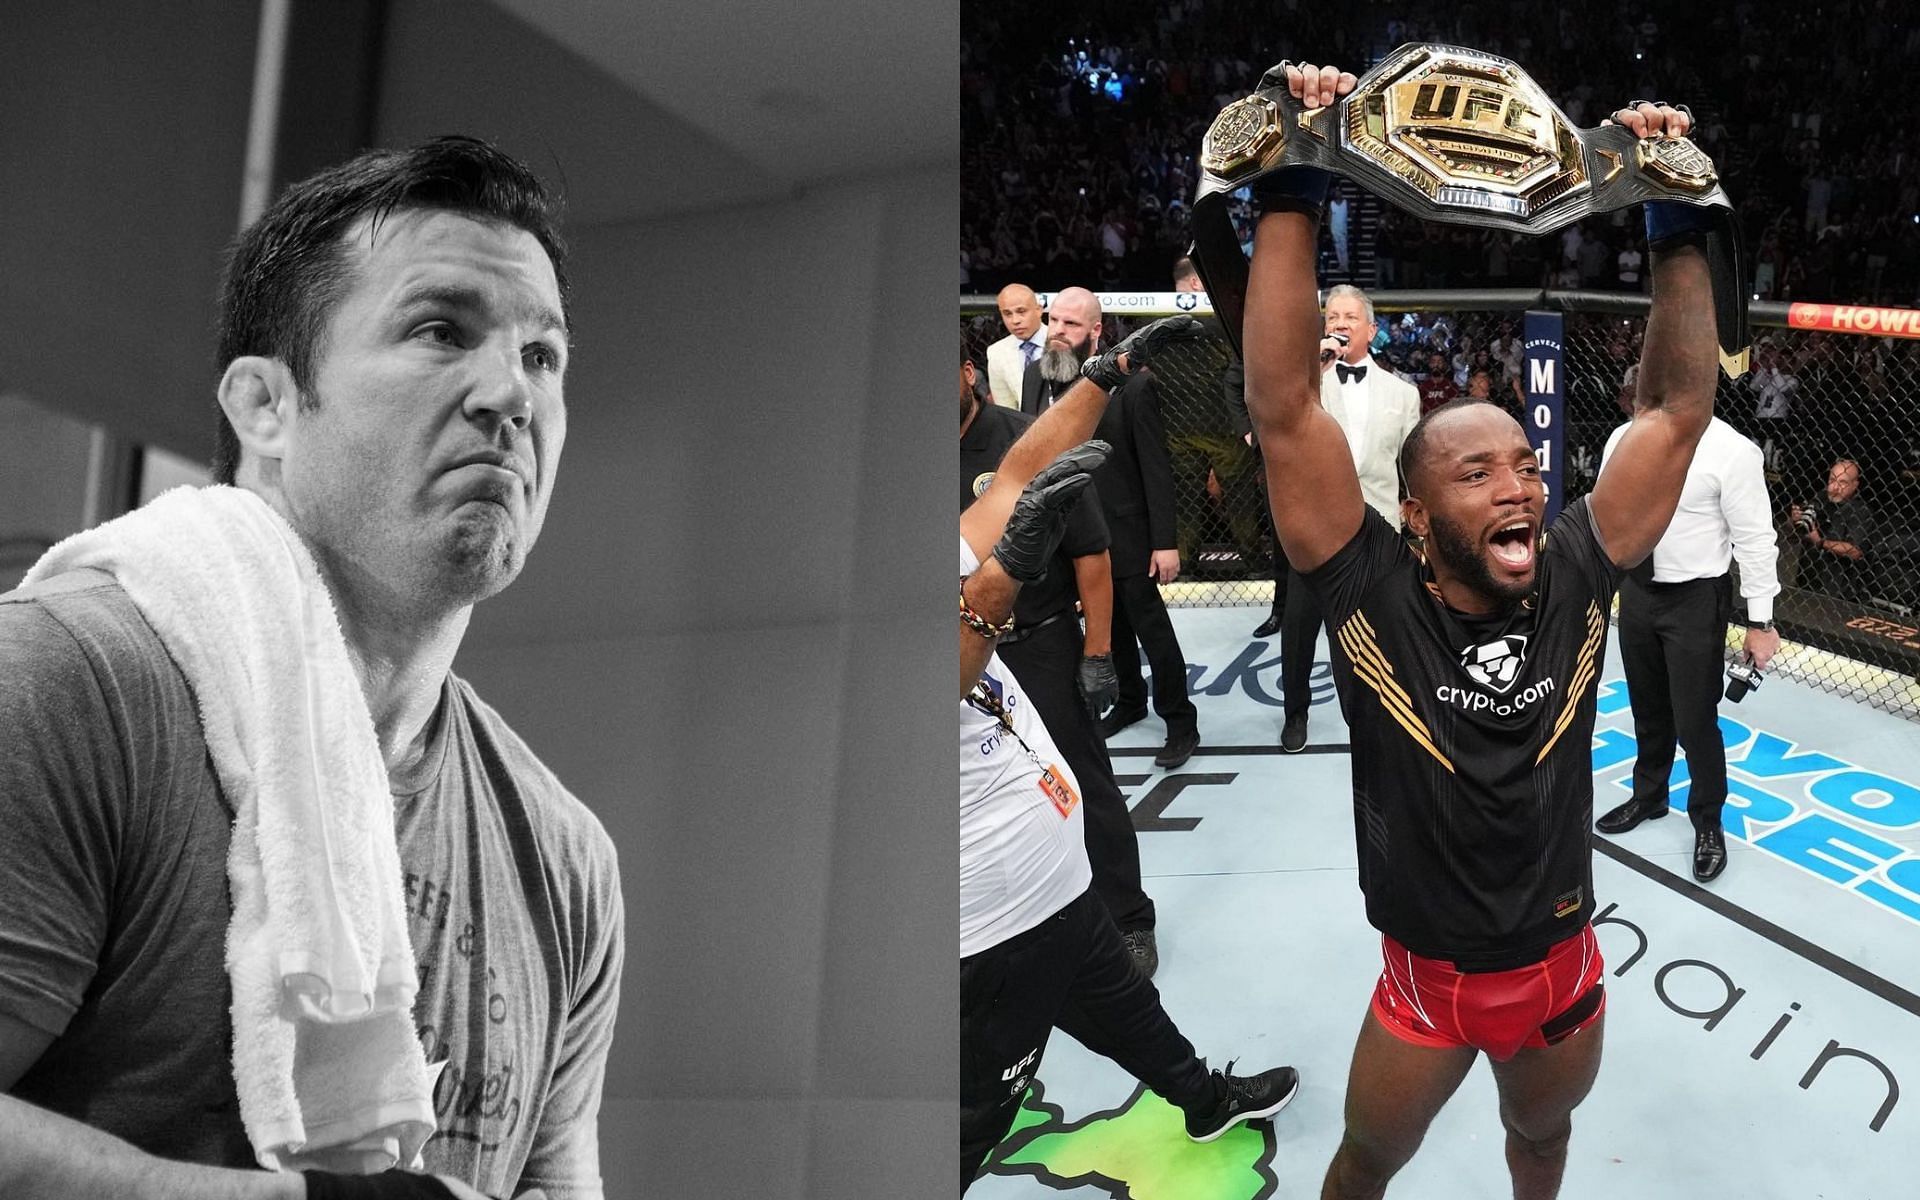 Chael Sonnen (Left) and Leon Edwards (Right) [Images via: @sonnench and @leonedwardsmma on Instagram]